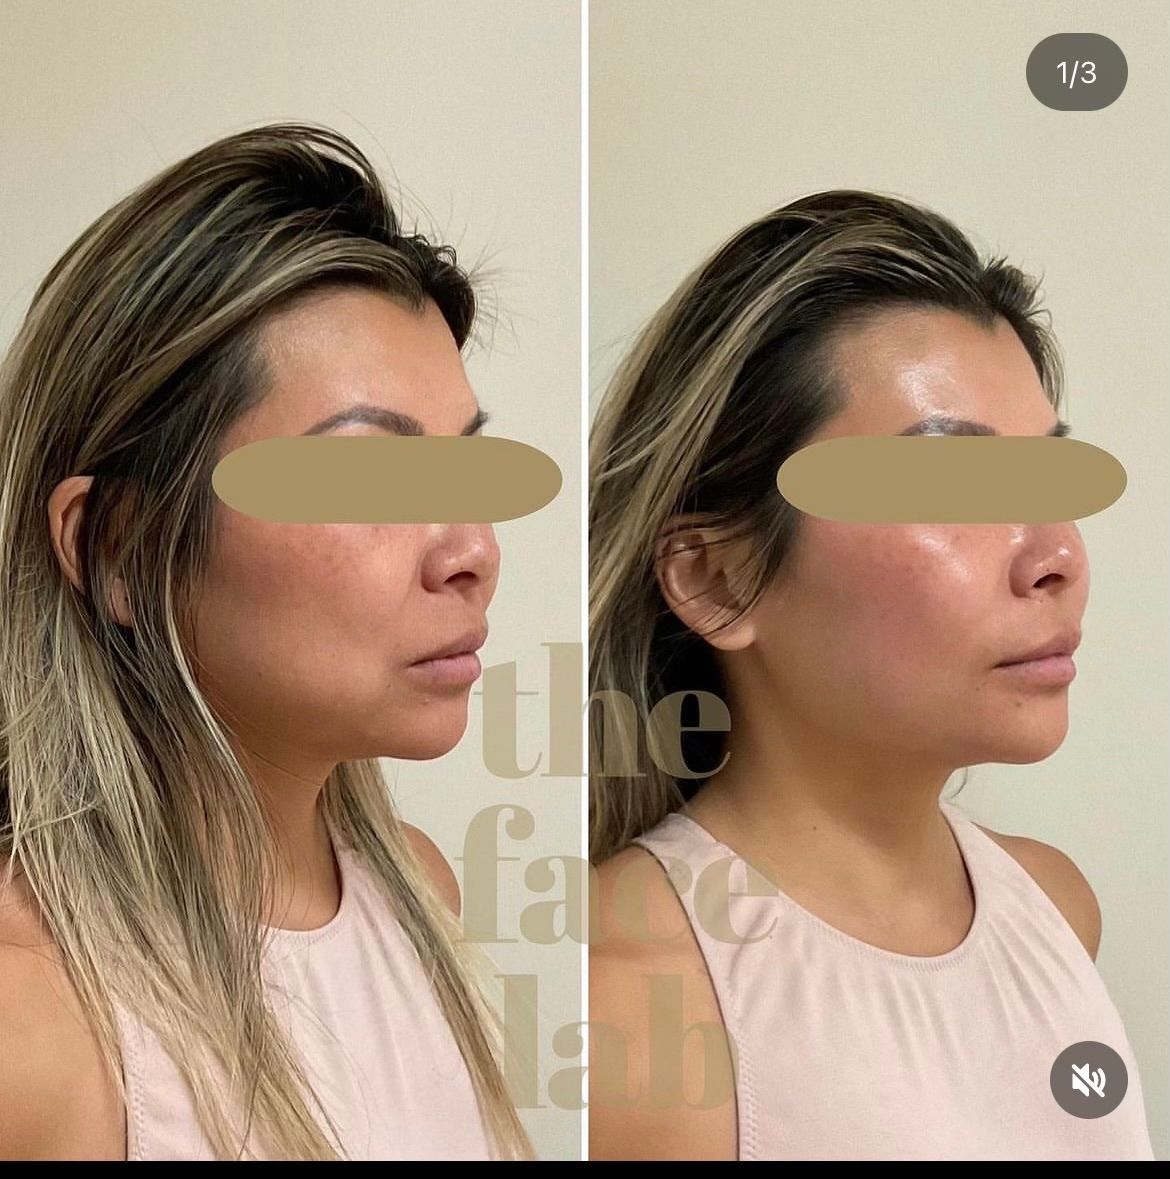 a before and after photo of a woman 's face with the words the face lab behind her